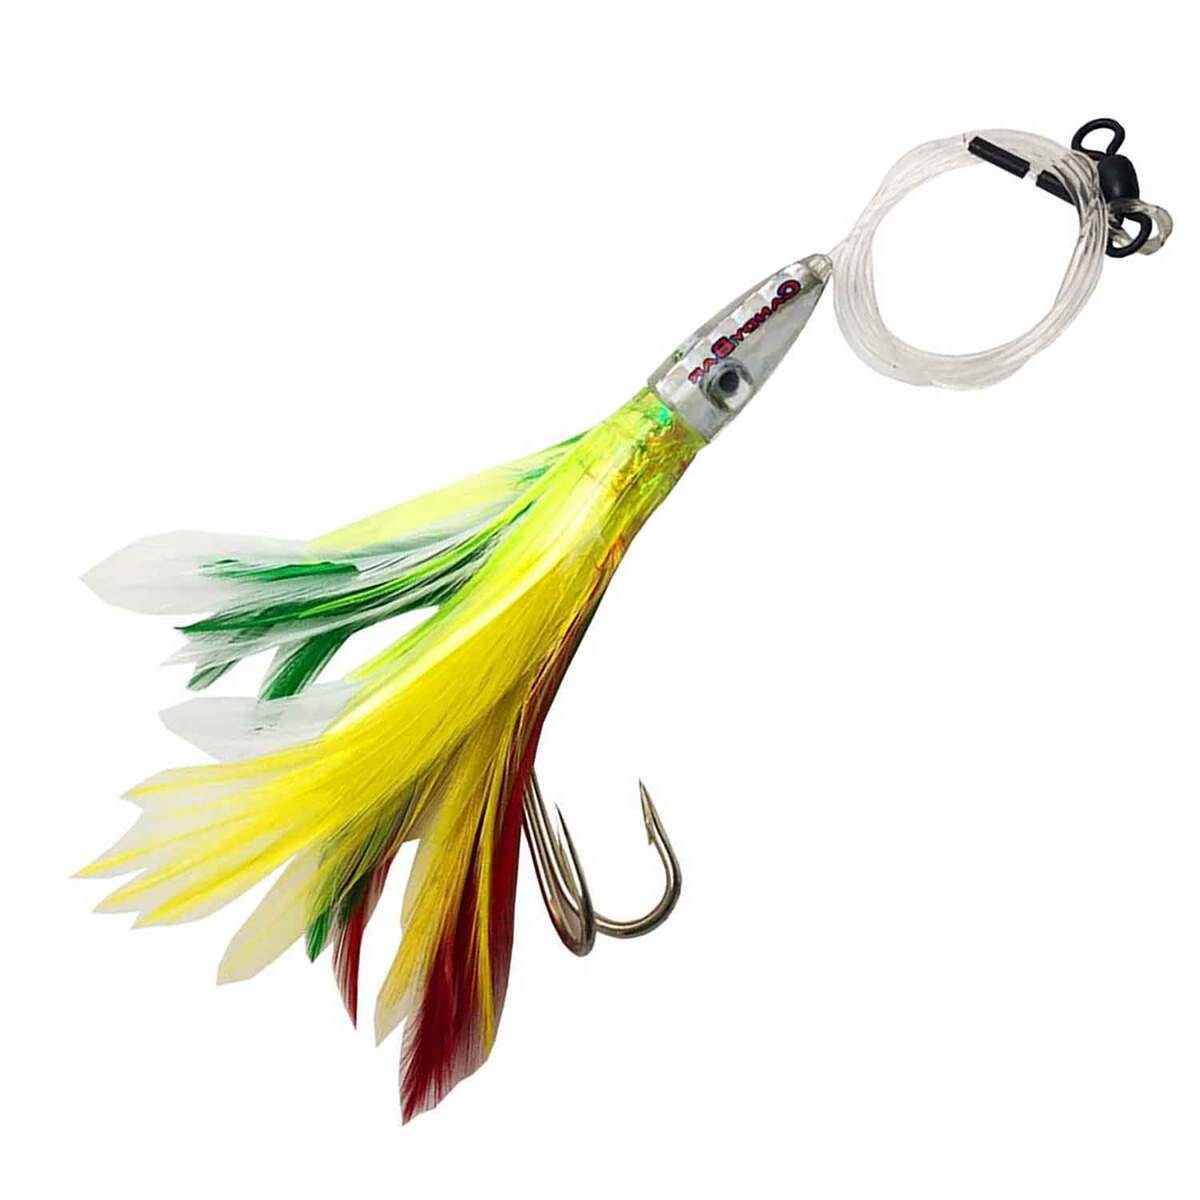 Candy Bar Lures Tuna Plug Saltwater Trolling Lure - Natural by Sportsman's Warehouse